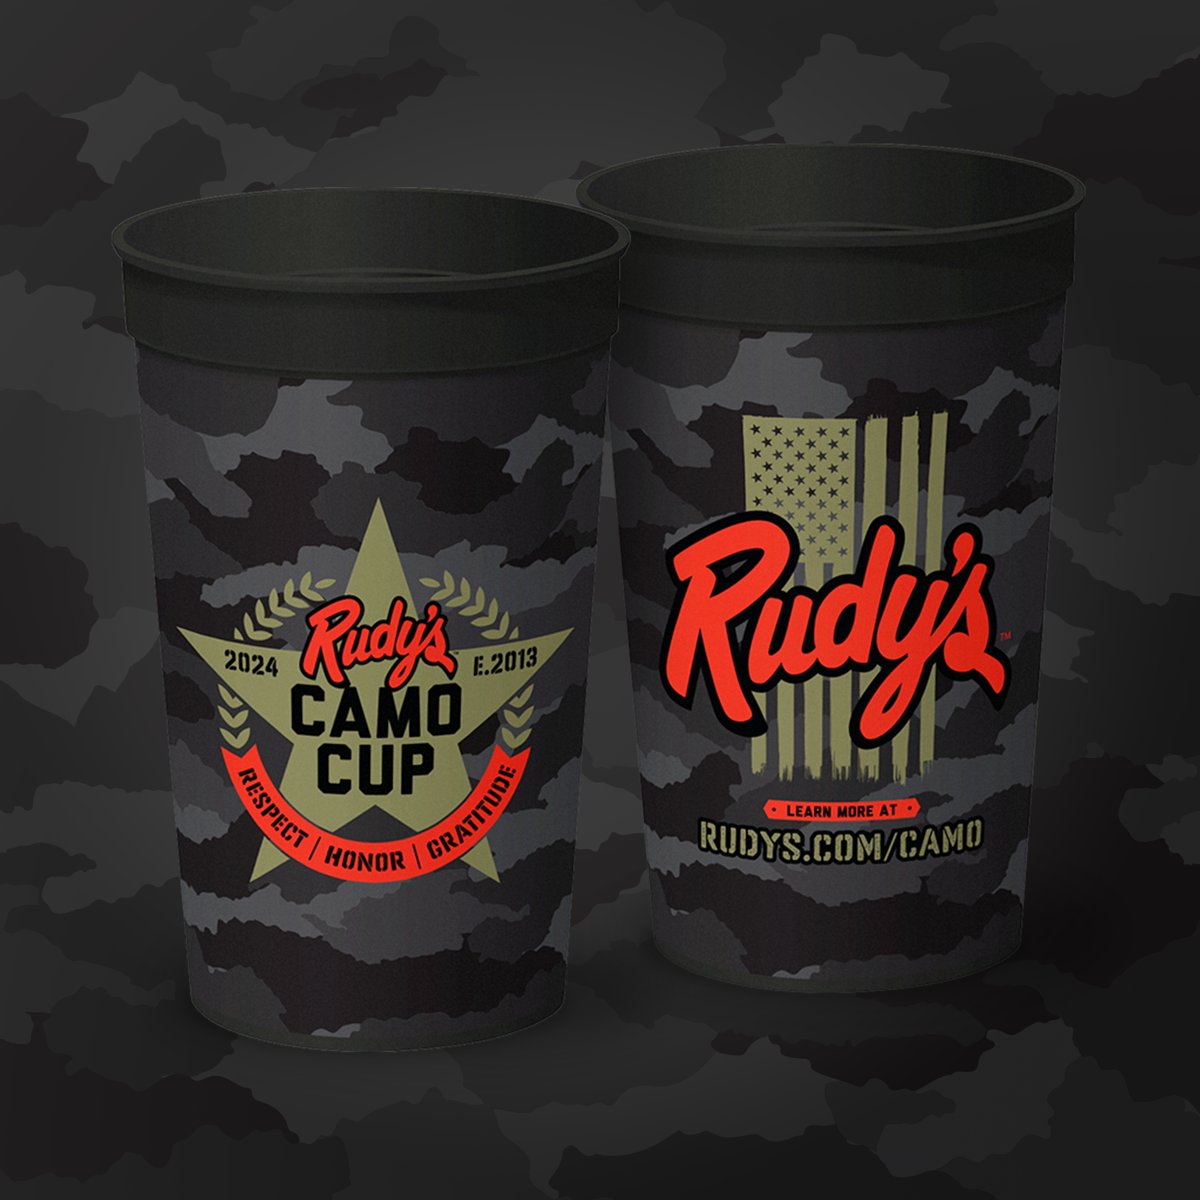 We are honored to be a beneficiary of the Camo Cup for A Cause by @rudysbbq for another year.
The Camo “Cup for A Cause” is only available during the month of May! Visit a participating location in May & or more at rudys.com/camo. #realtexasbbq #rudysbbq #cupforacause